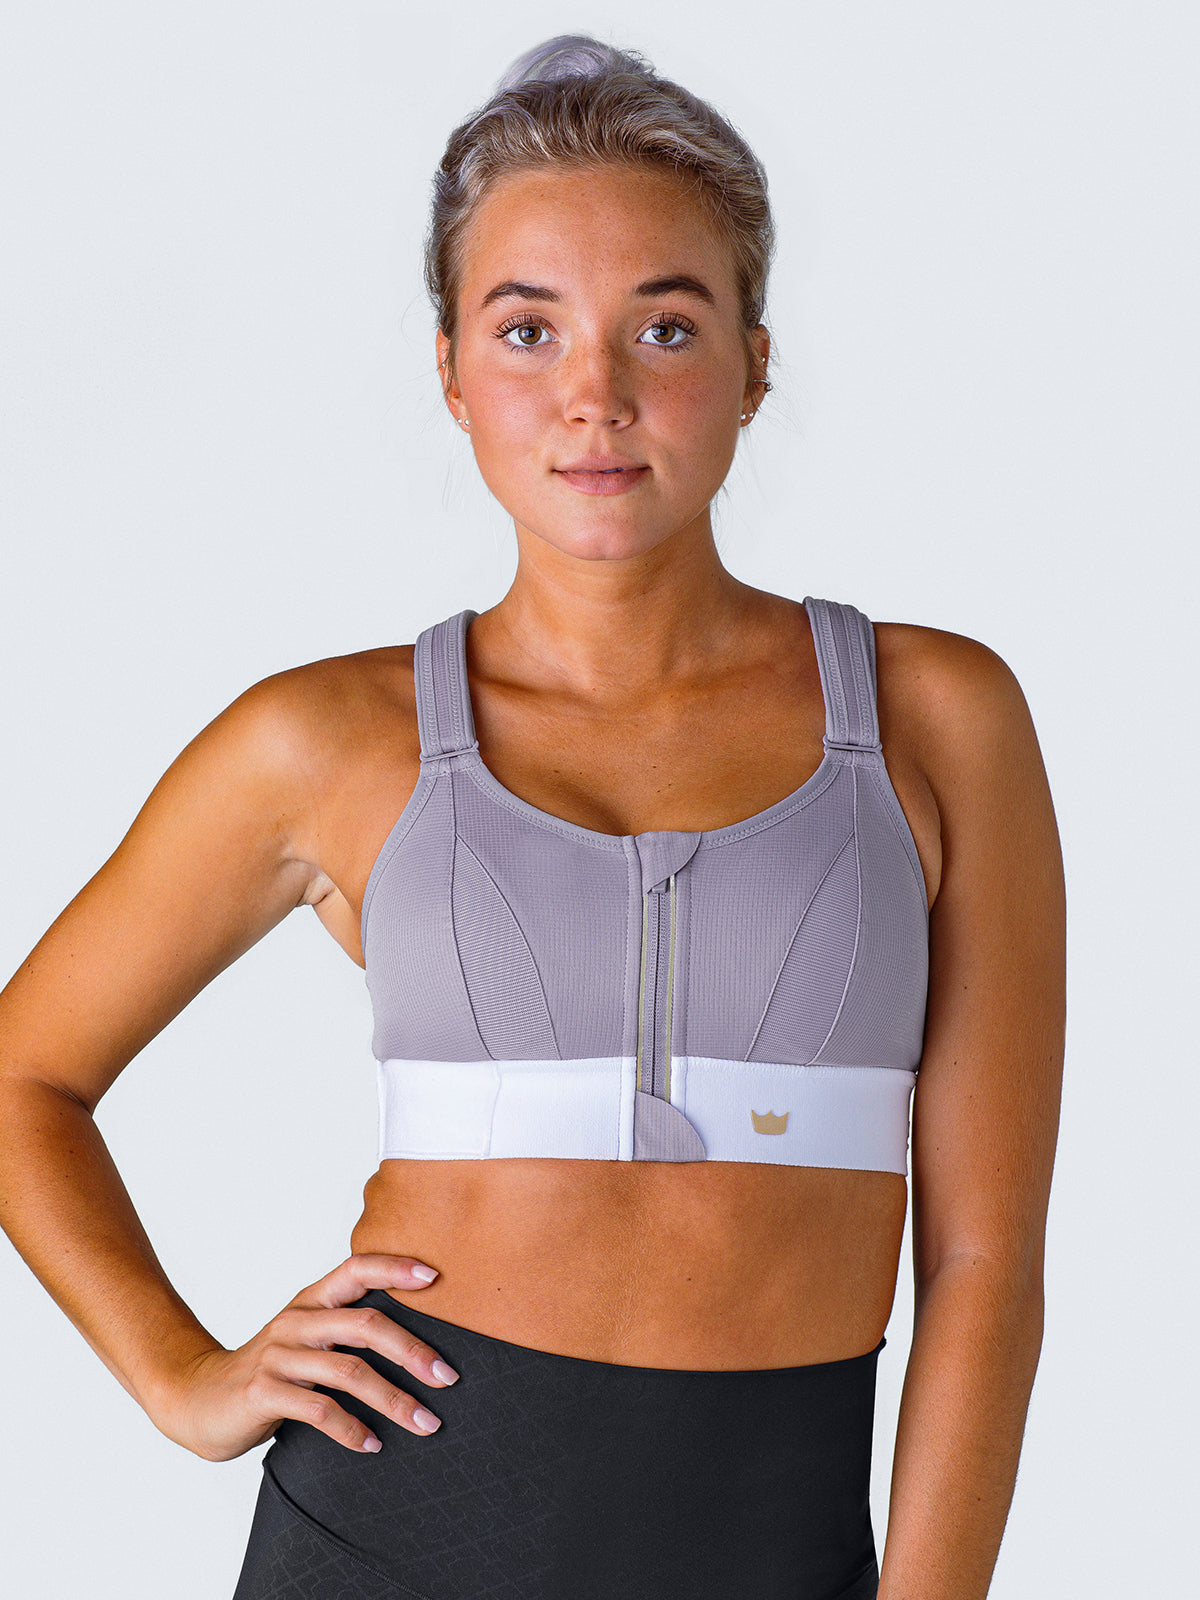 New SHEFIT Tie Dry Ultimate Sports Bra 6 LUXE High Impact Zipper Adjustable  PADS